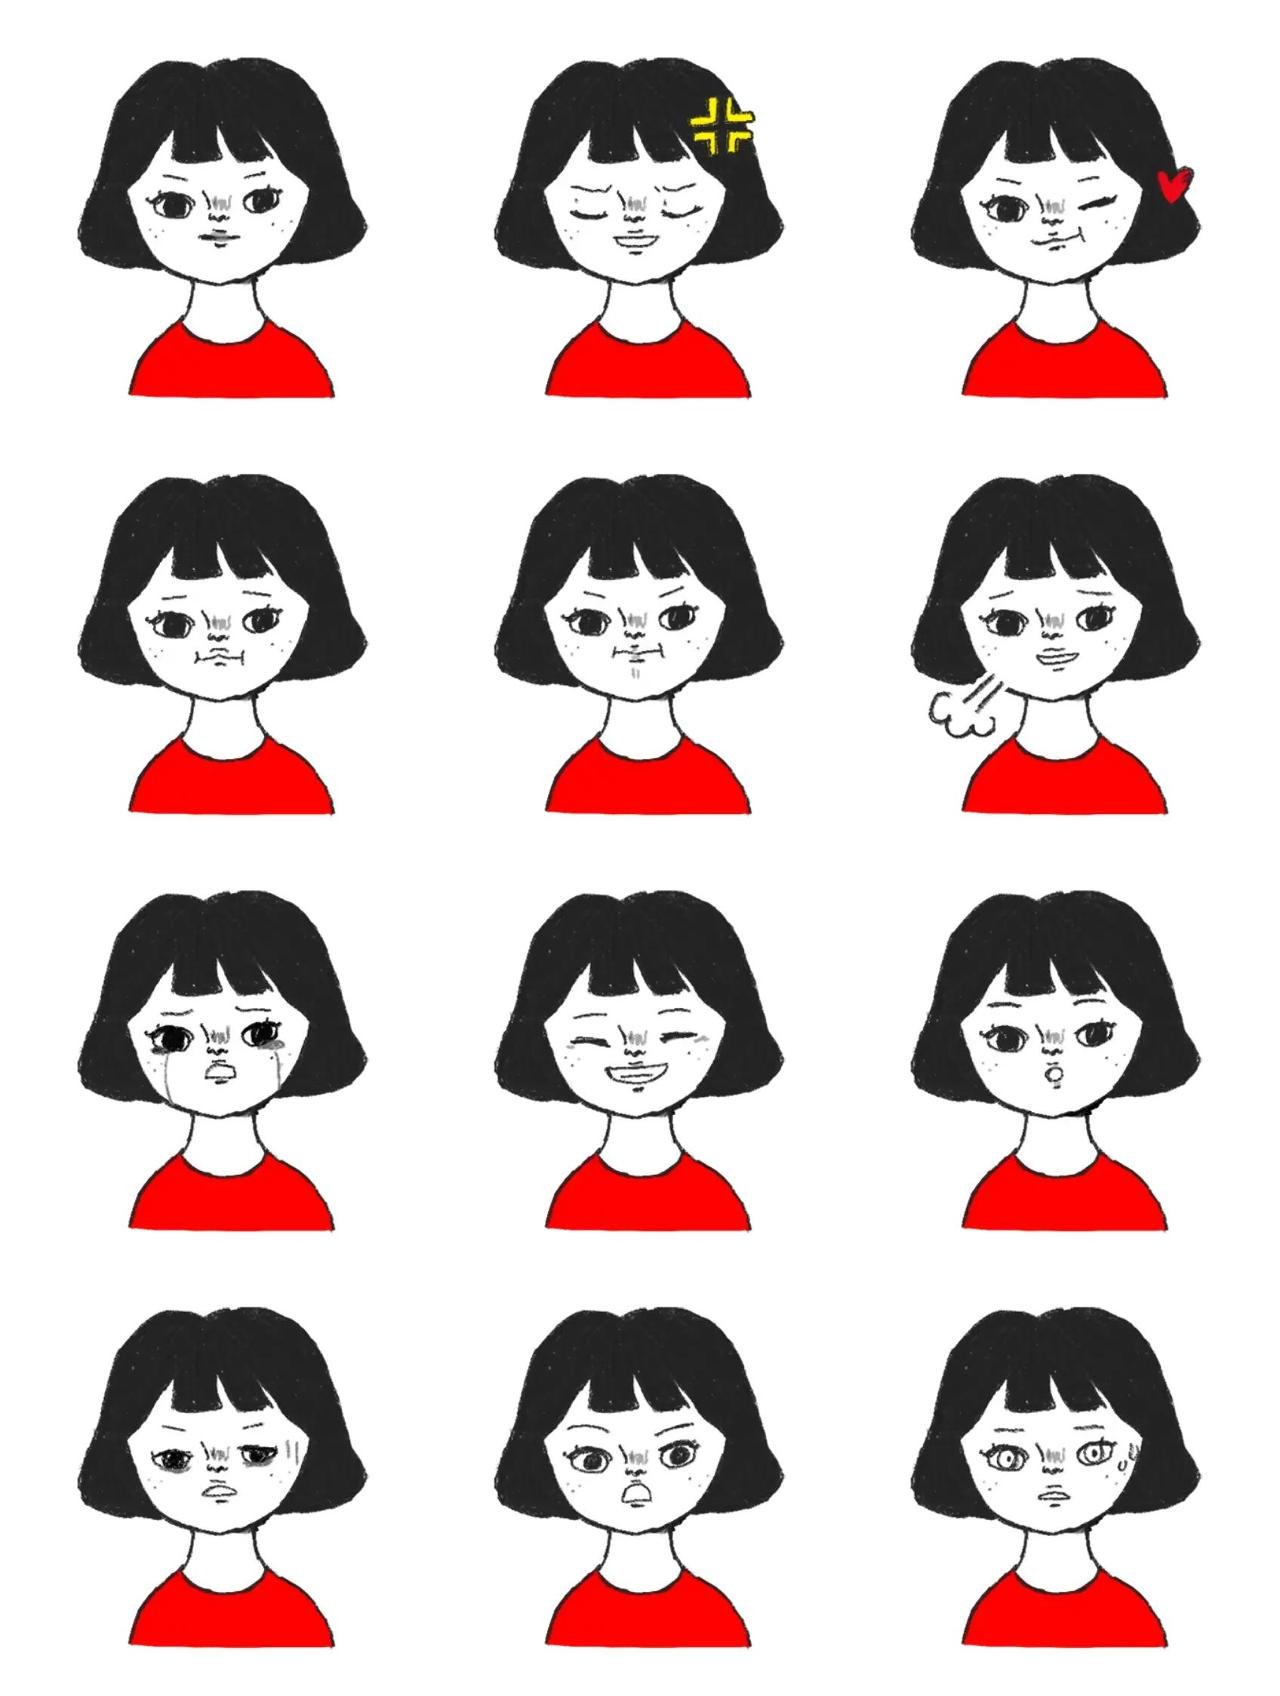 A freckle faced girl 01 Animation/Cartoon,People sticker pack for Whatsapp, Telegram, Signal, and others chatting and message apps